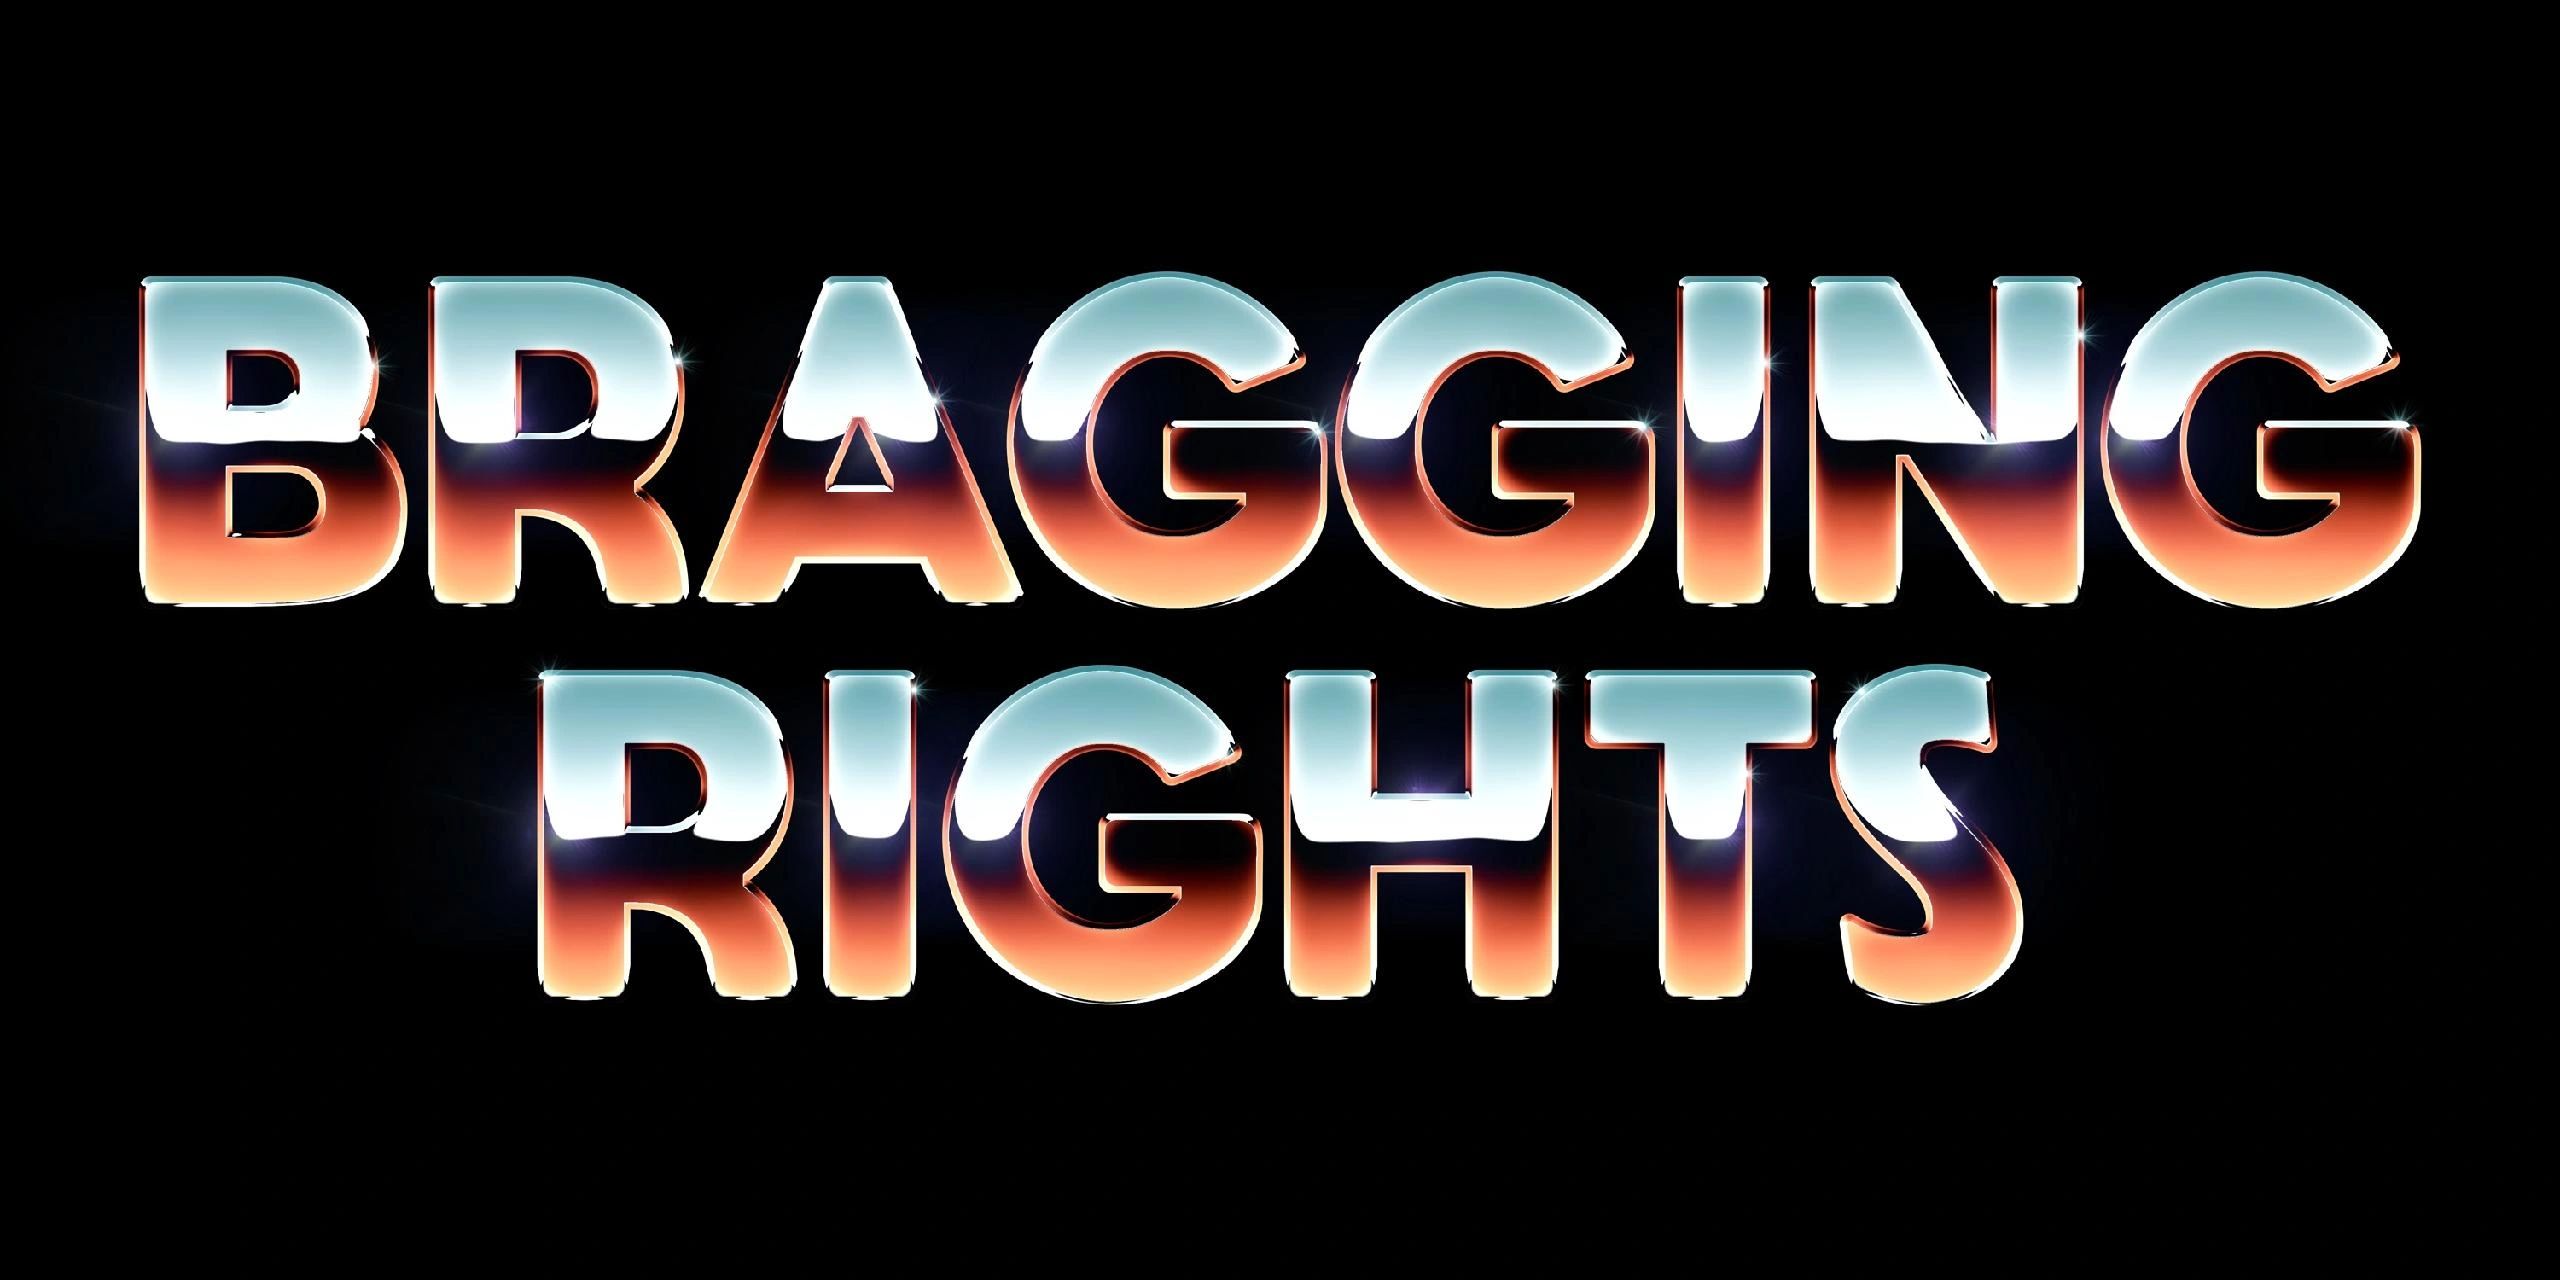 The logo for Bragging Rights, Gainesville, Florida's newest arcade experience.